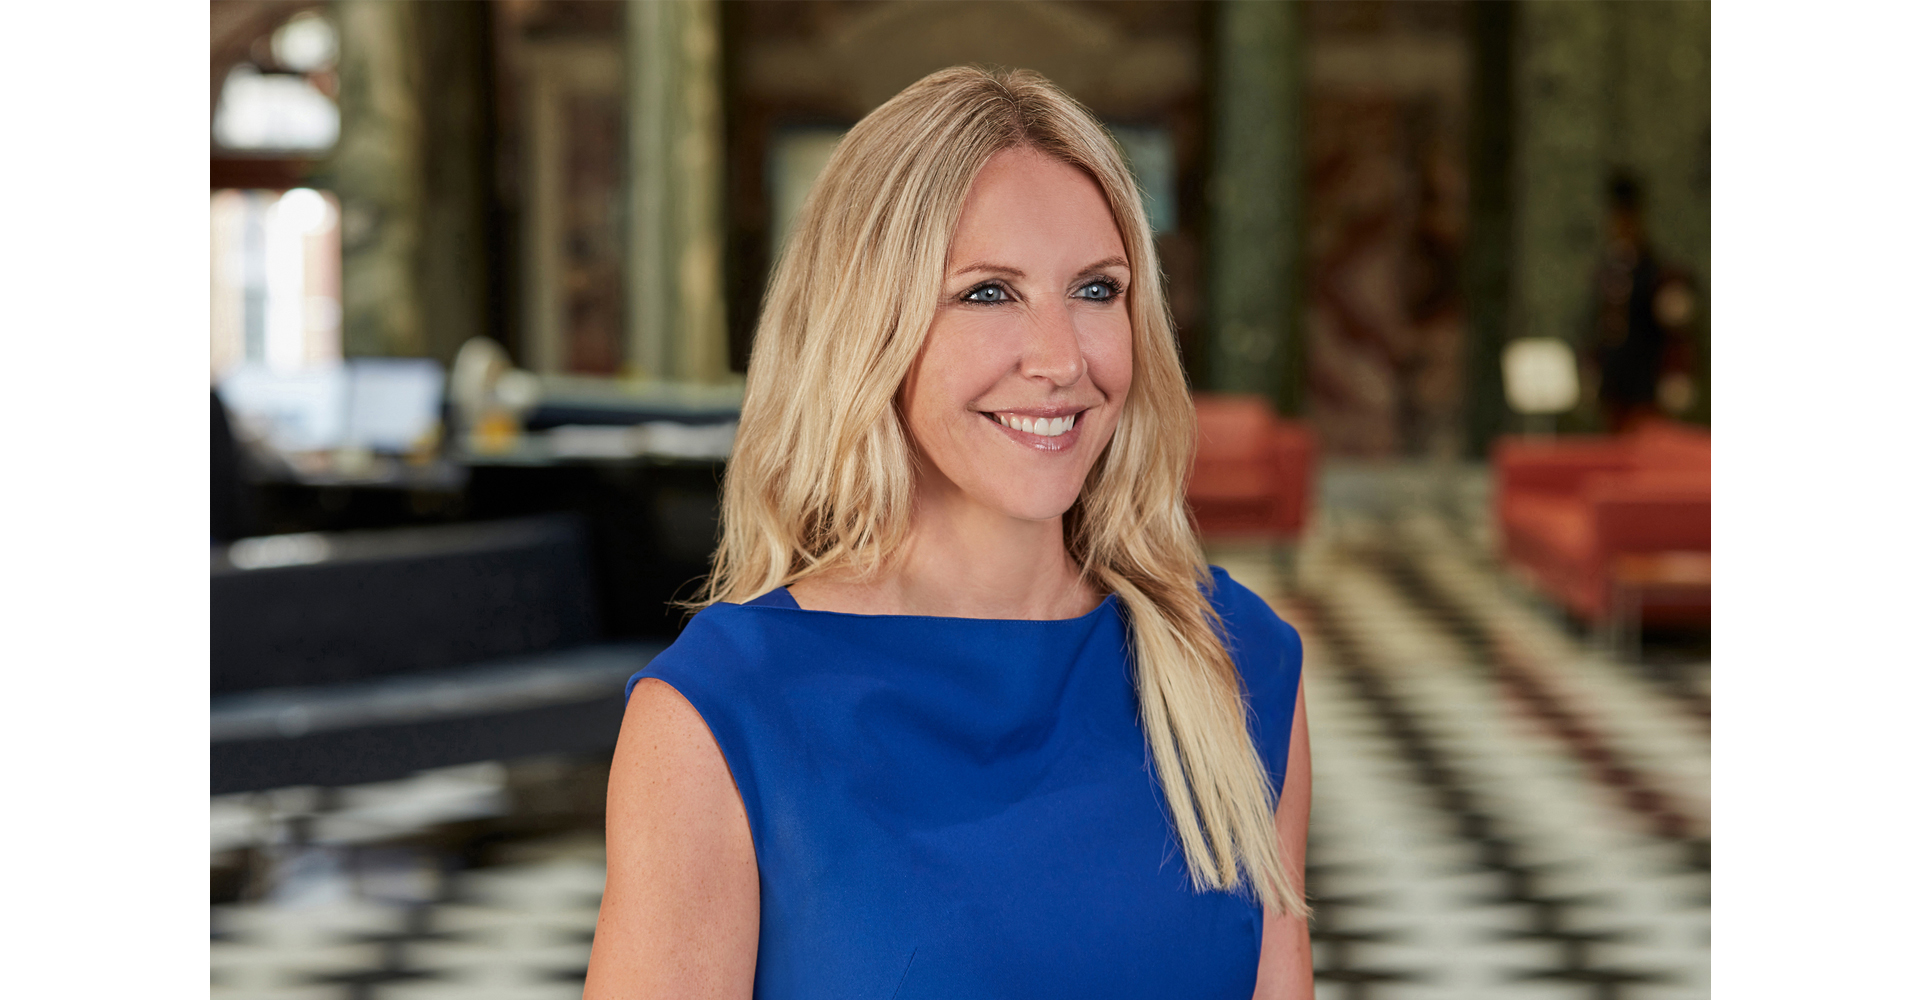 Female business woman posing for corporate head shot in front of Oxford blue backdrop